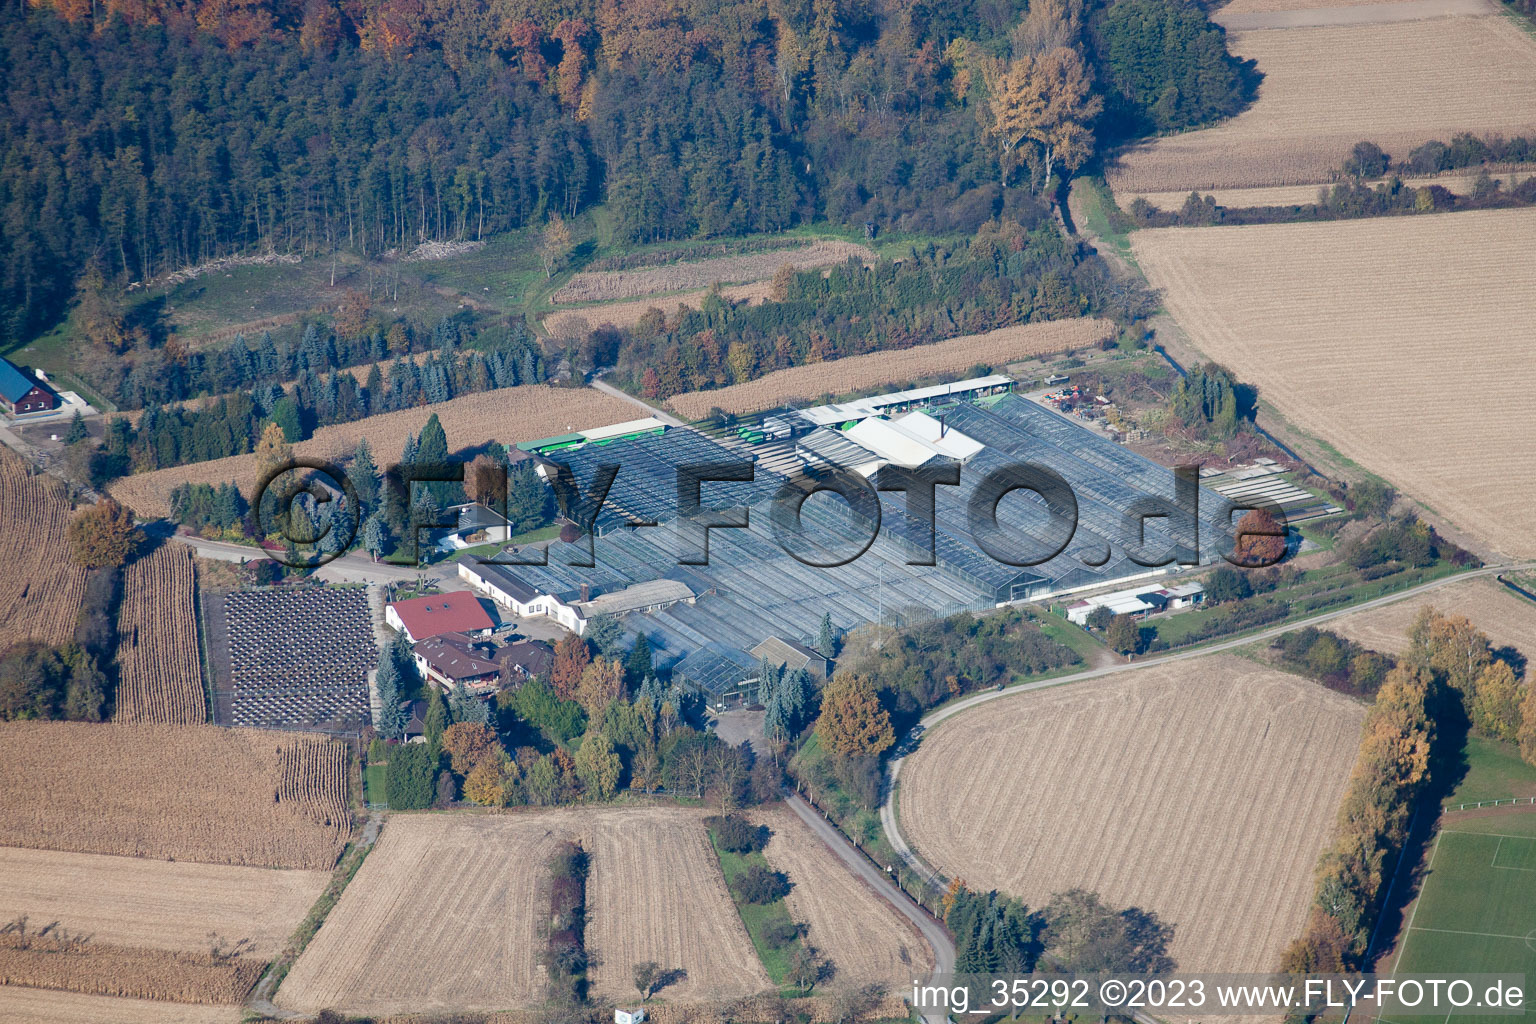 Aerial photograpy of Geranium Endisch GmbH in Hagenbach in the state Rhineland-Palatinate, Germany